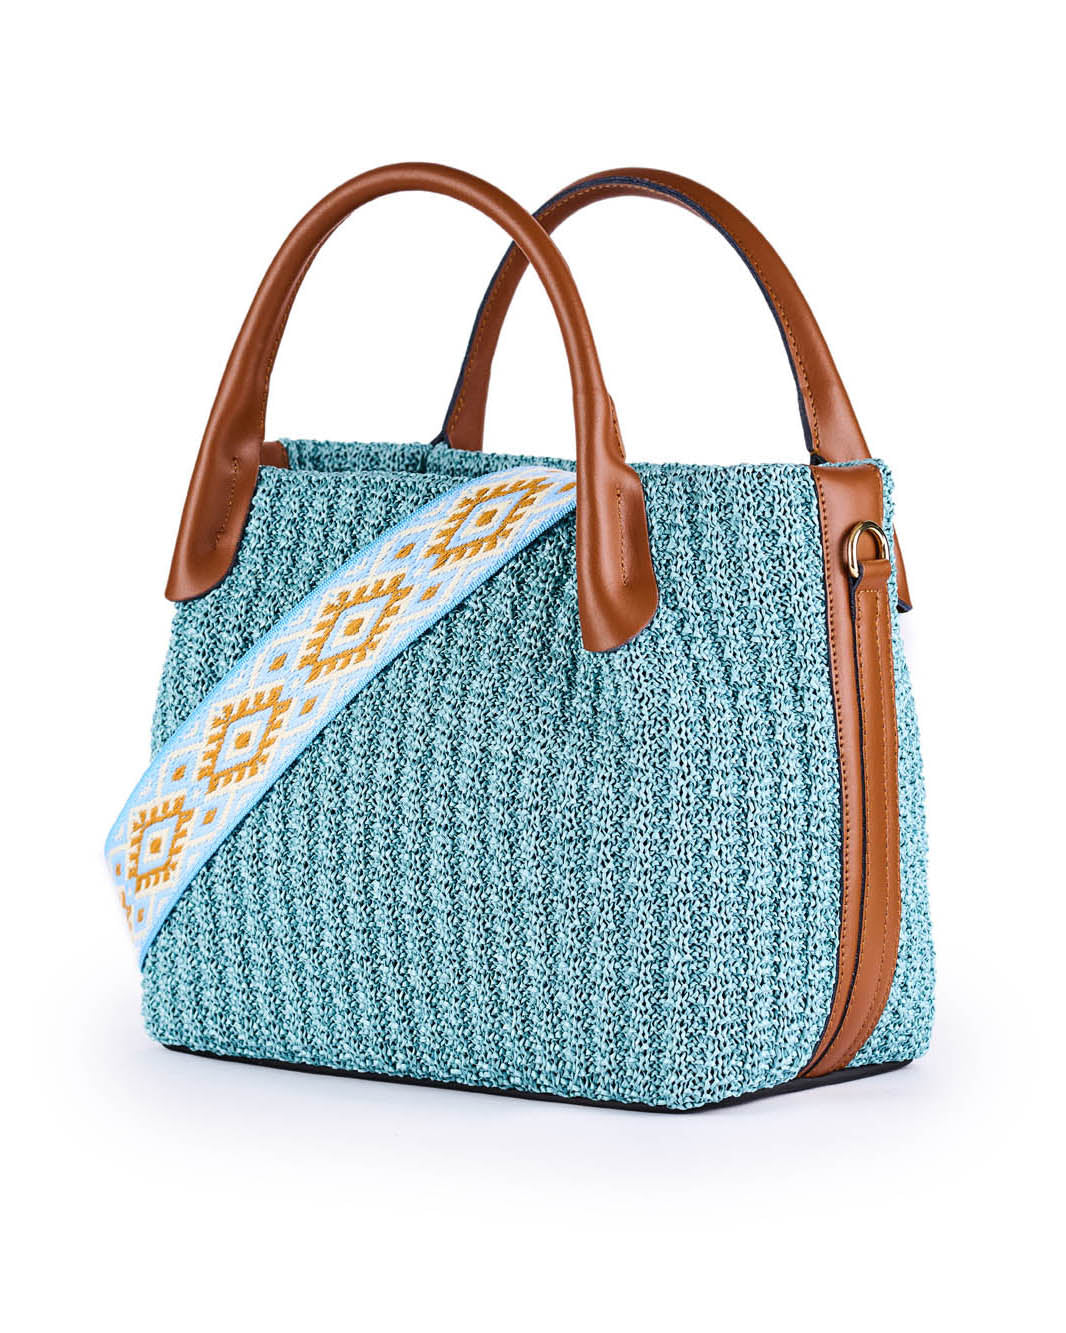 Blue woven handbag with brown leather accents and patterned strap